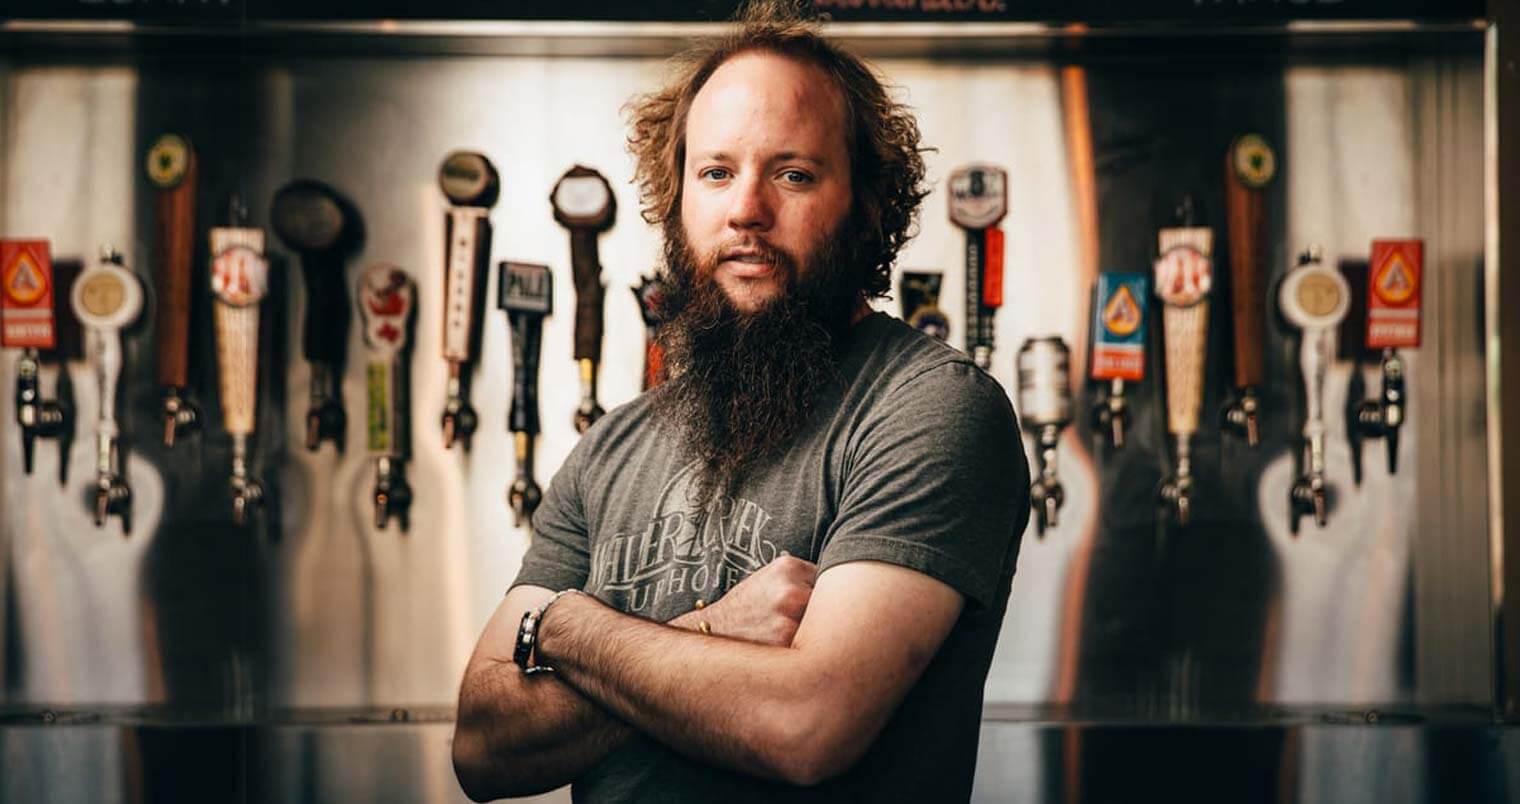 Justin Malone, serious with bar taps, featured image